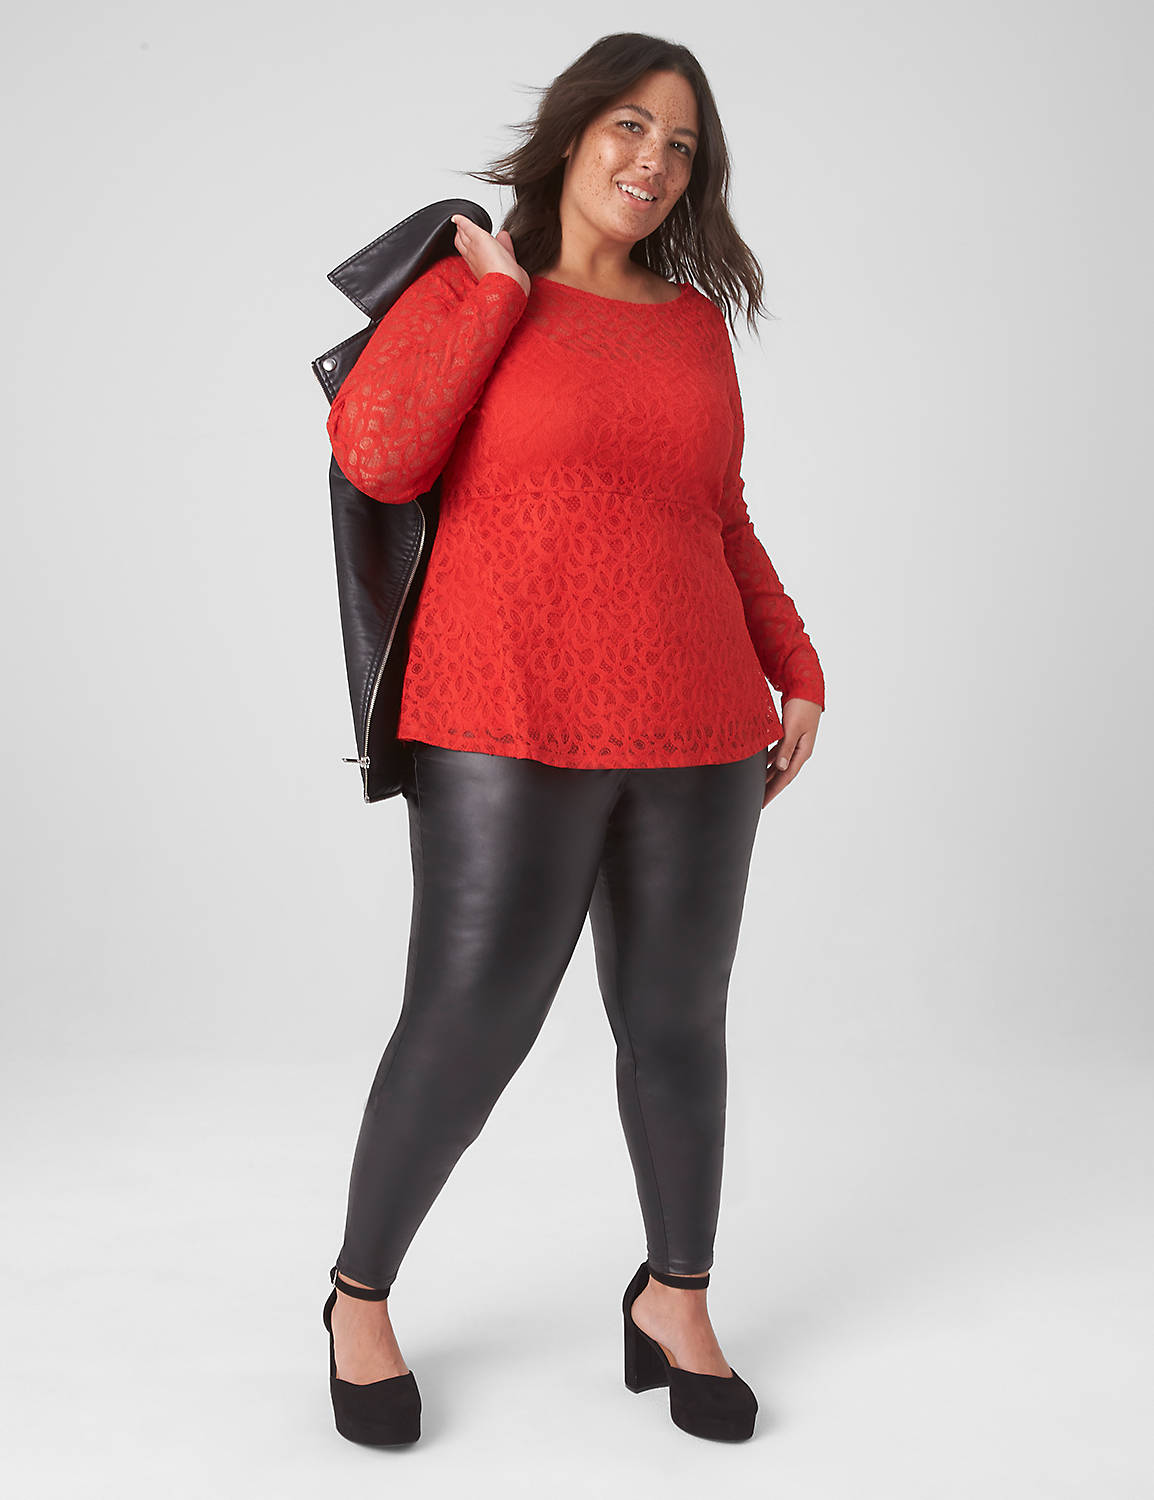 Plus Size Clothing Store at Hanes Point in Winston Salem | Lane Bryant